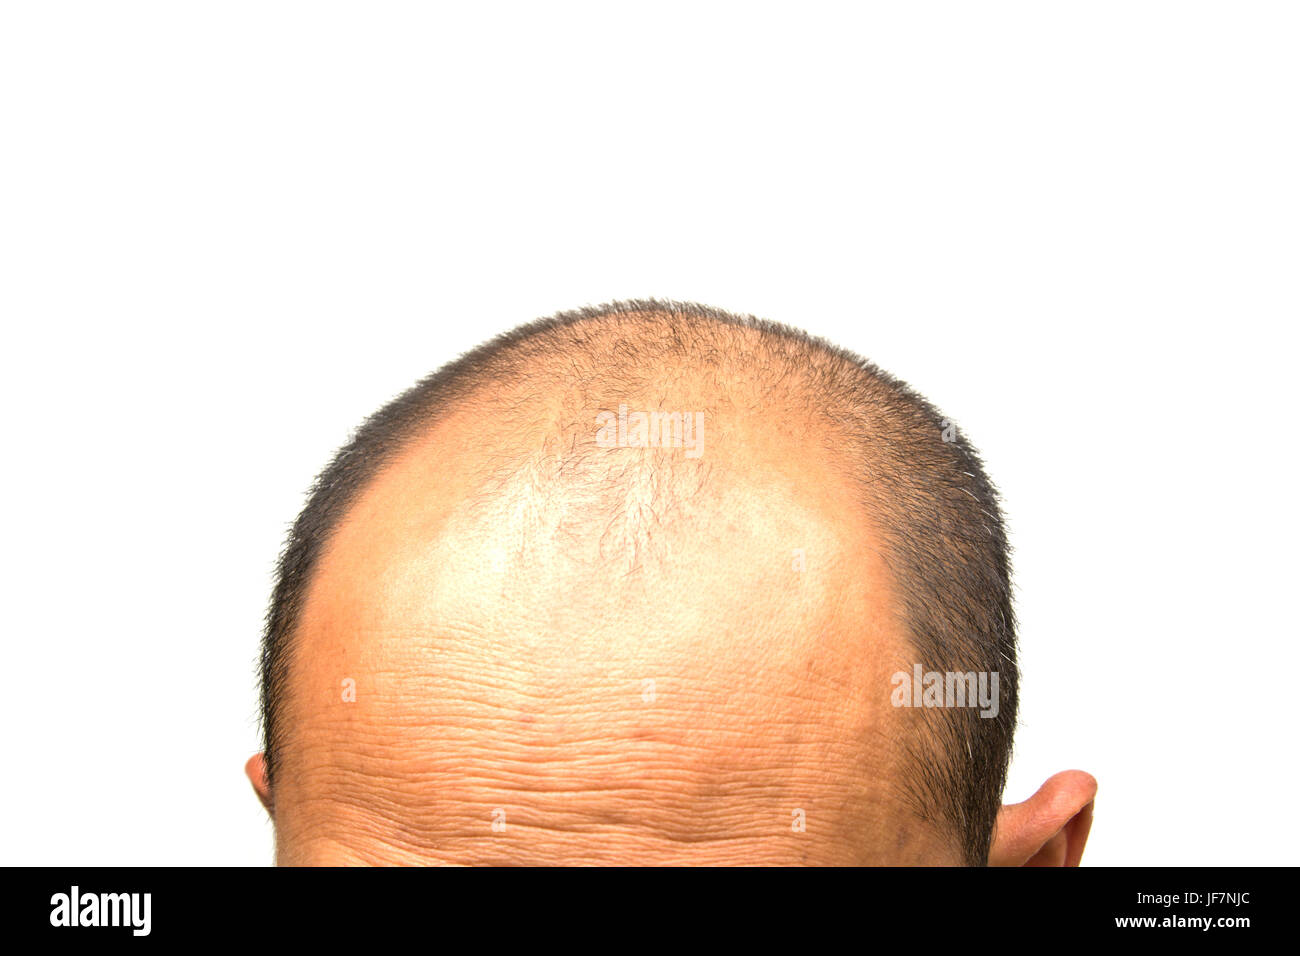 Head of man lose one's hair, glabrous on his head for elderly man Stock Photo